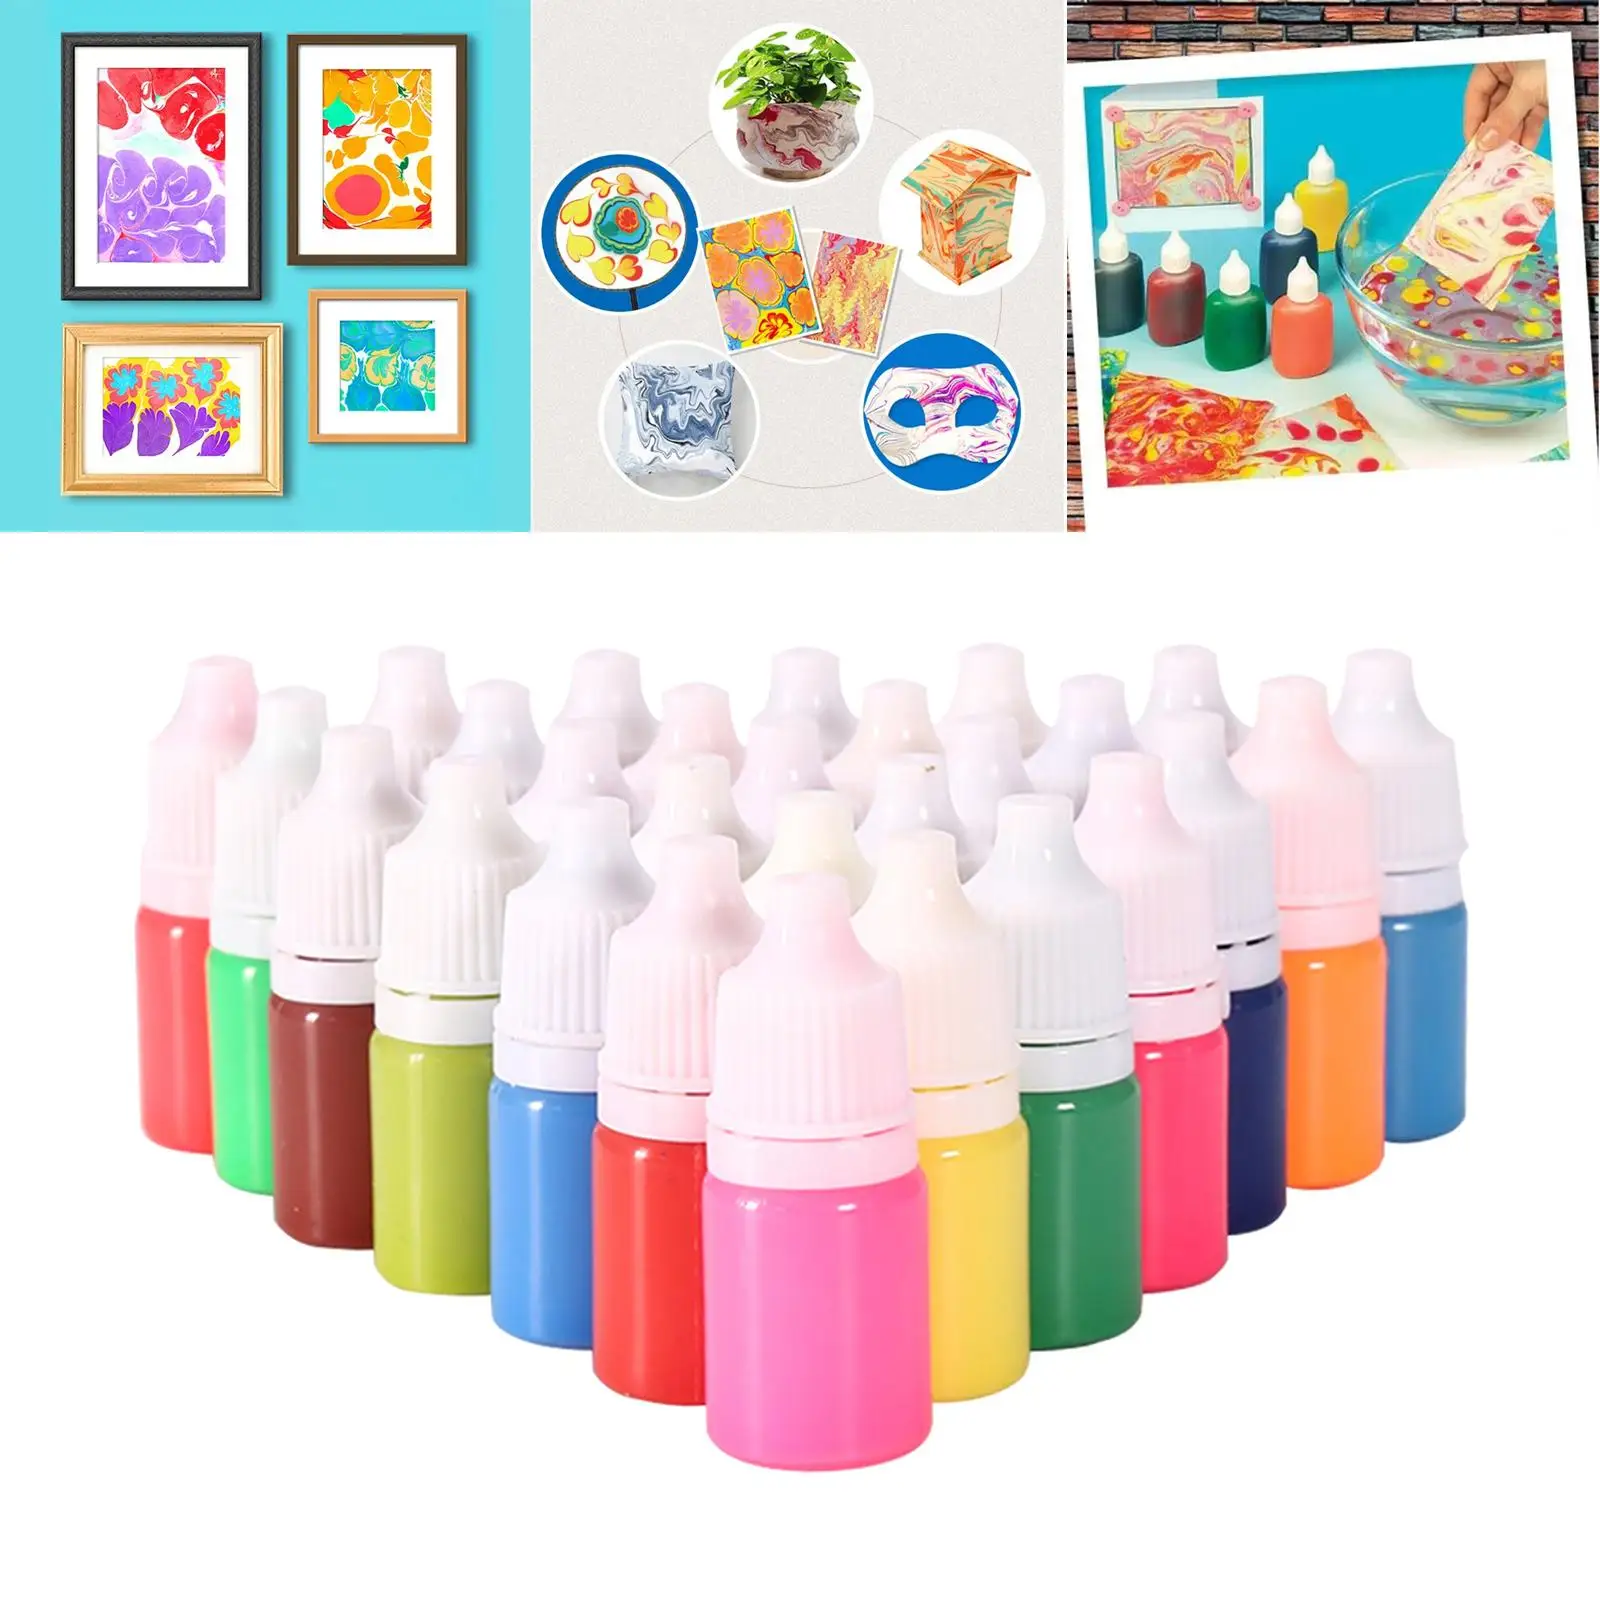 Water Painting Set Art Supplies Watercolours Art Craft 24 Tubes DIY Paint Water Drawing Set for Educational Toy Gift Children